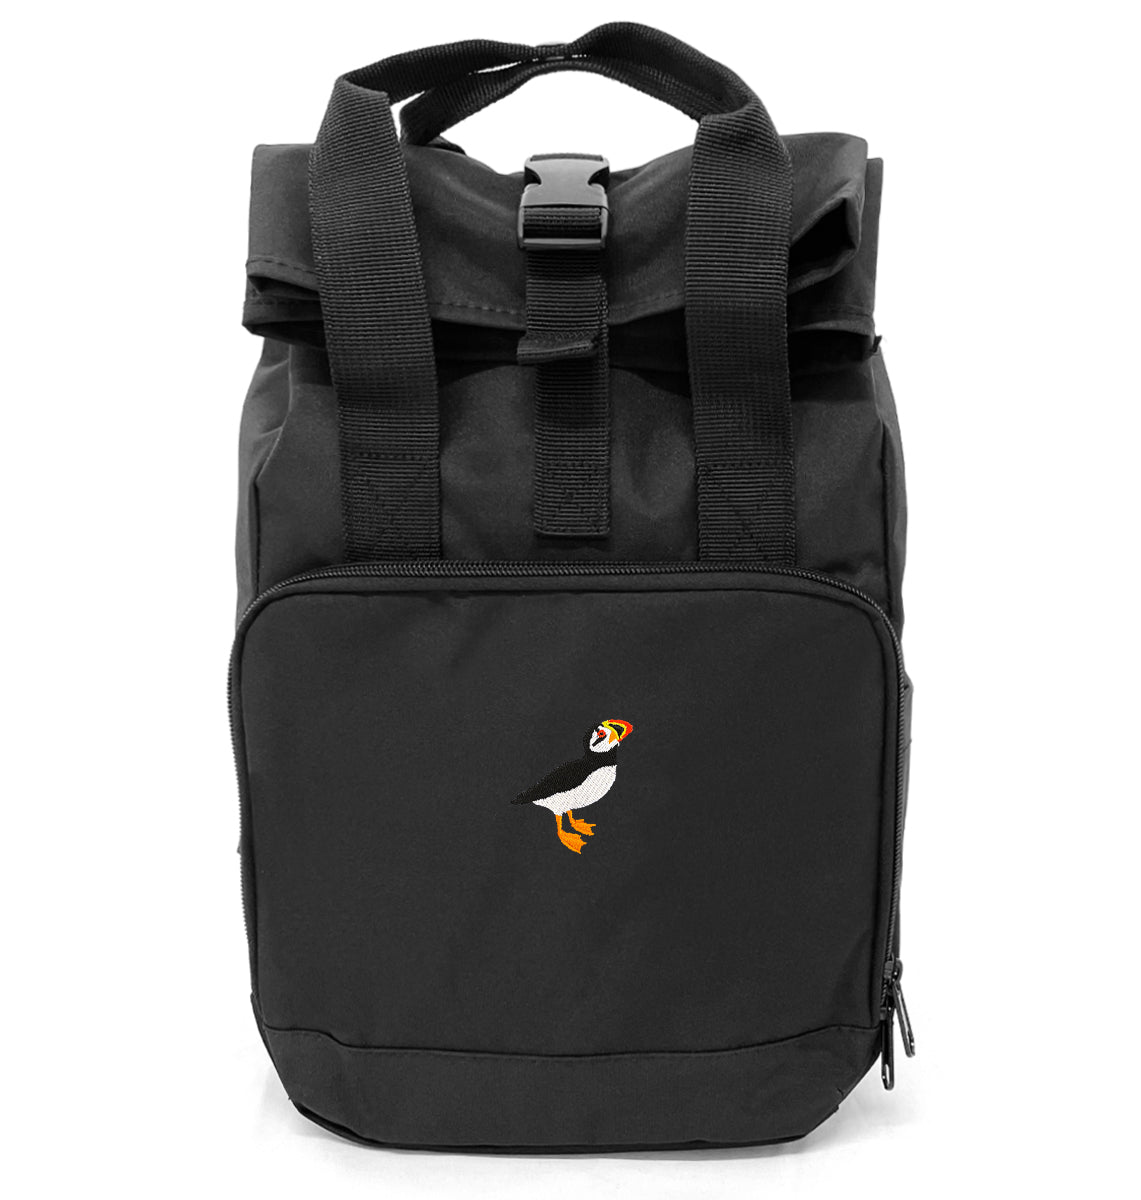 Puffin Mini Roll-top Recycled Backpack - Blue Panda